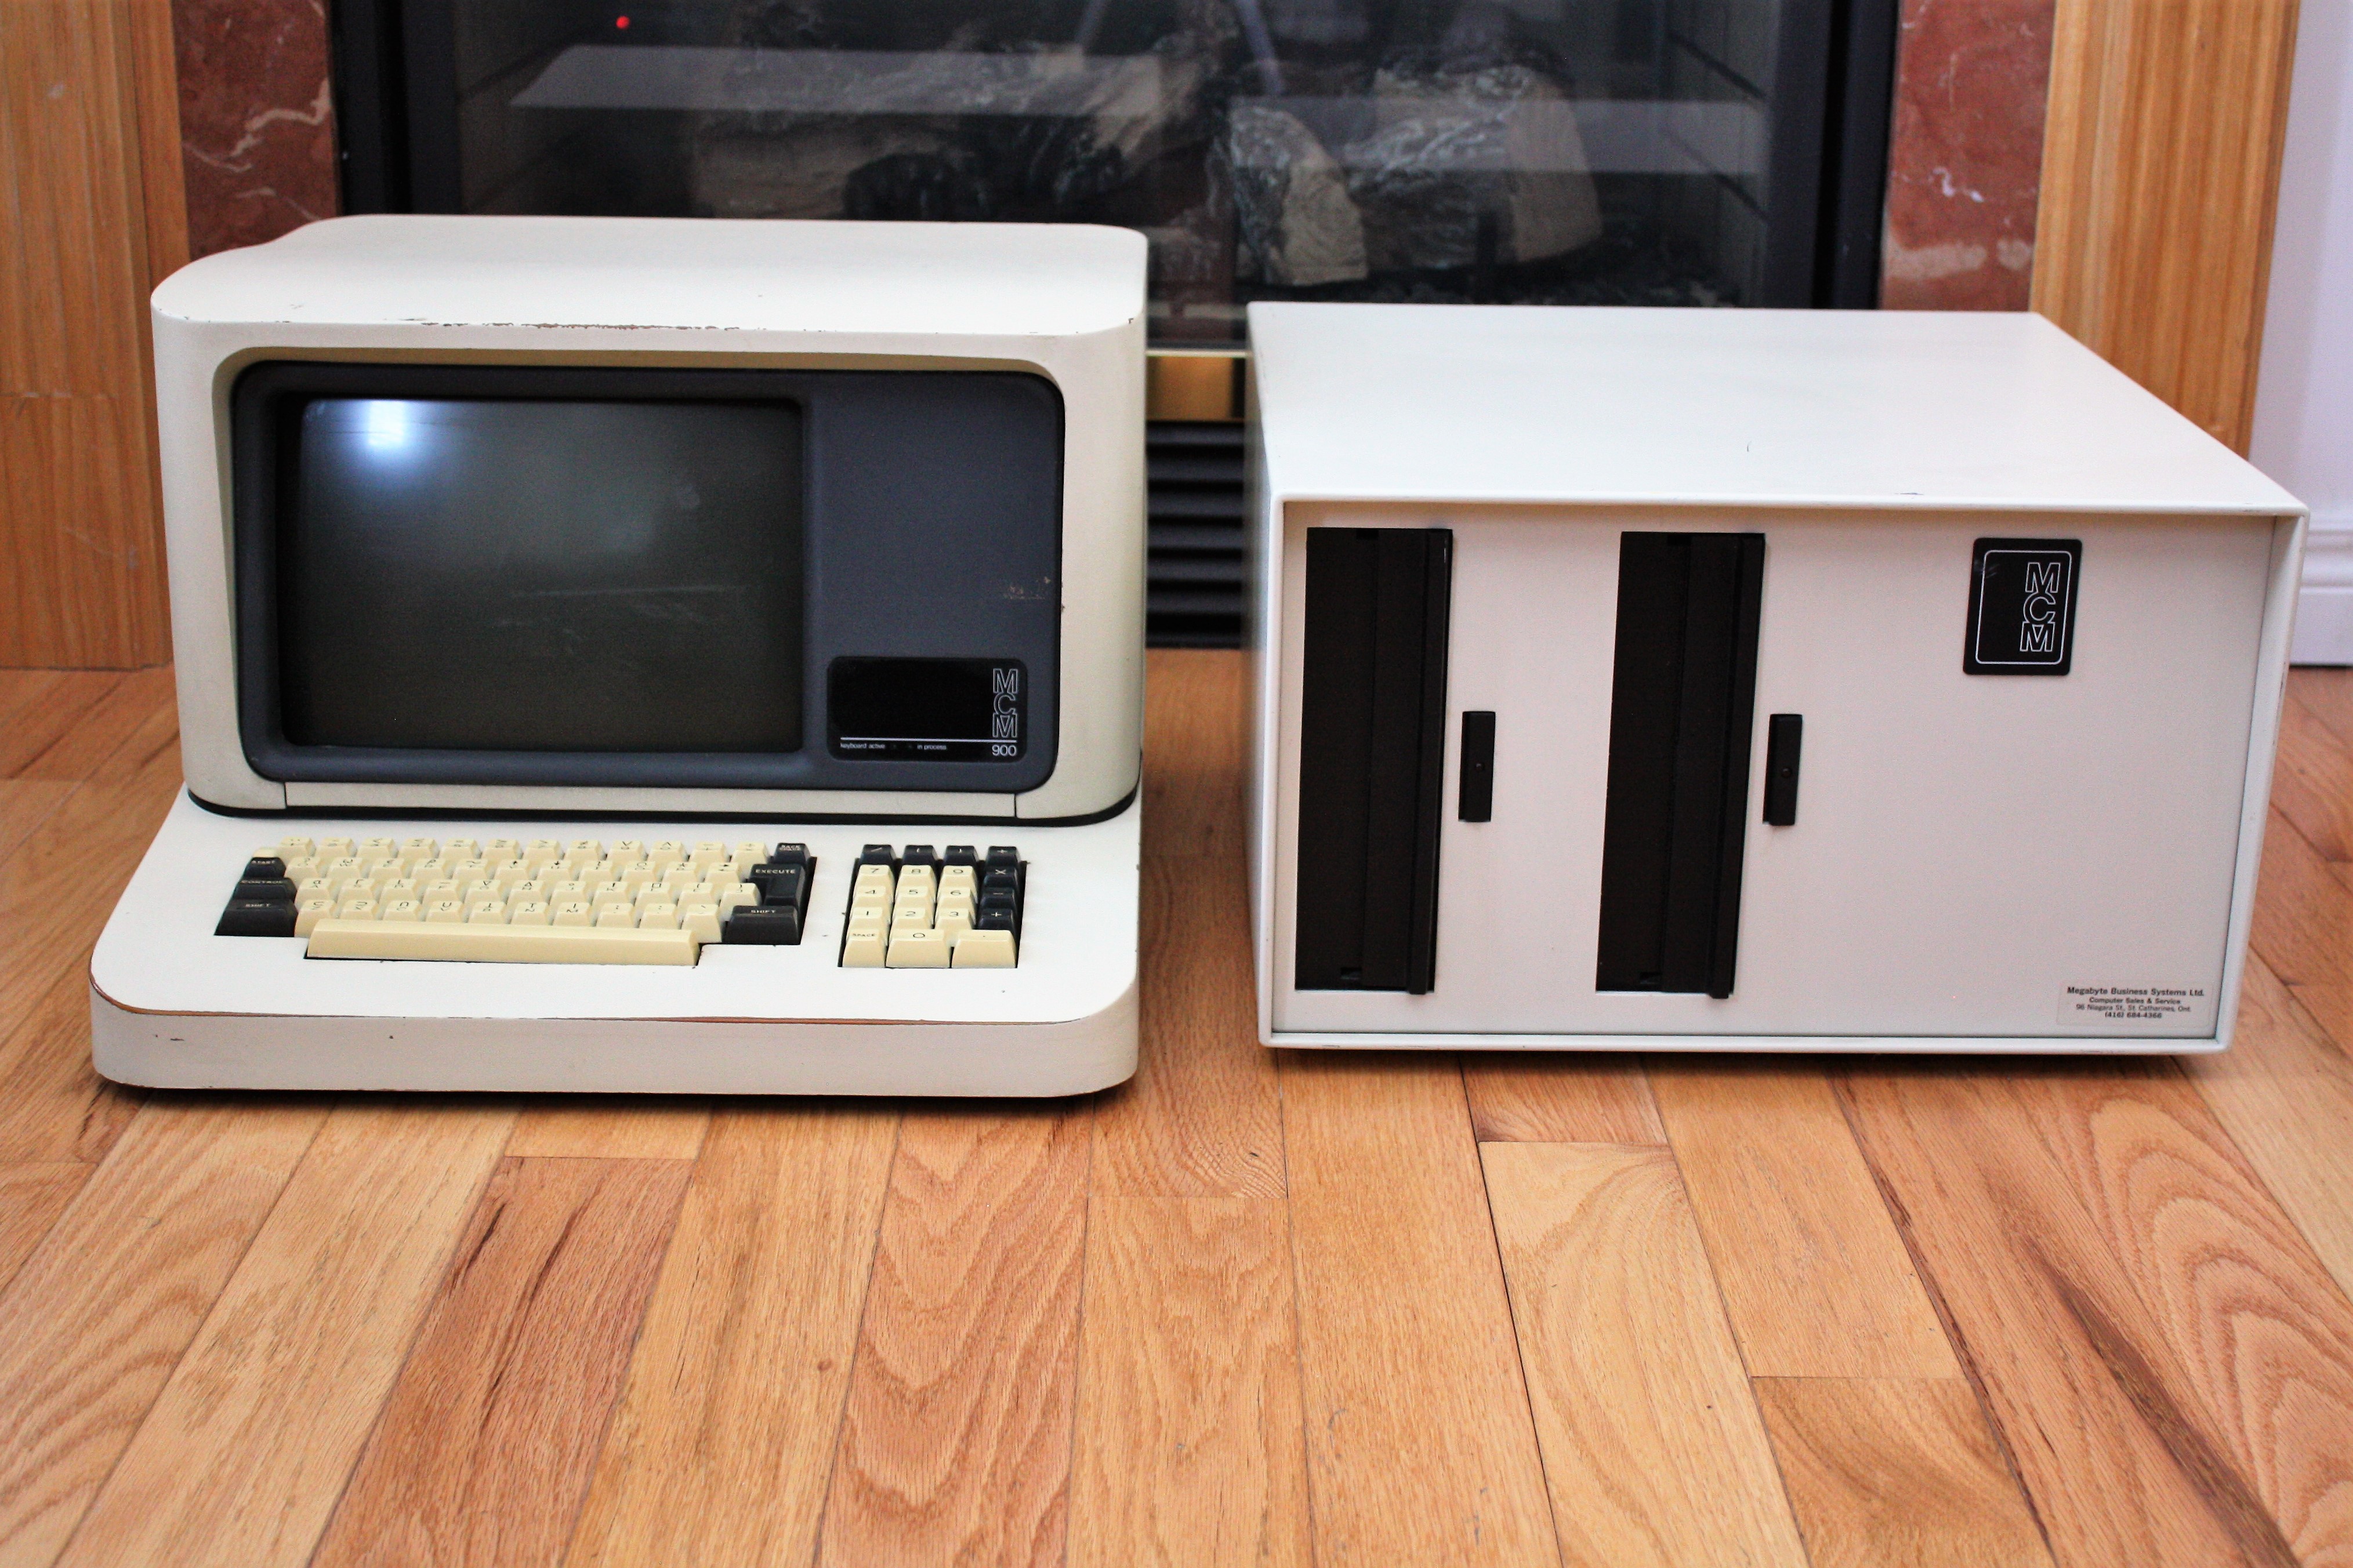 MCM/900 with floppy drive